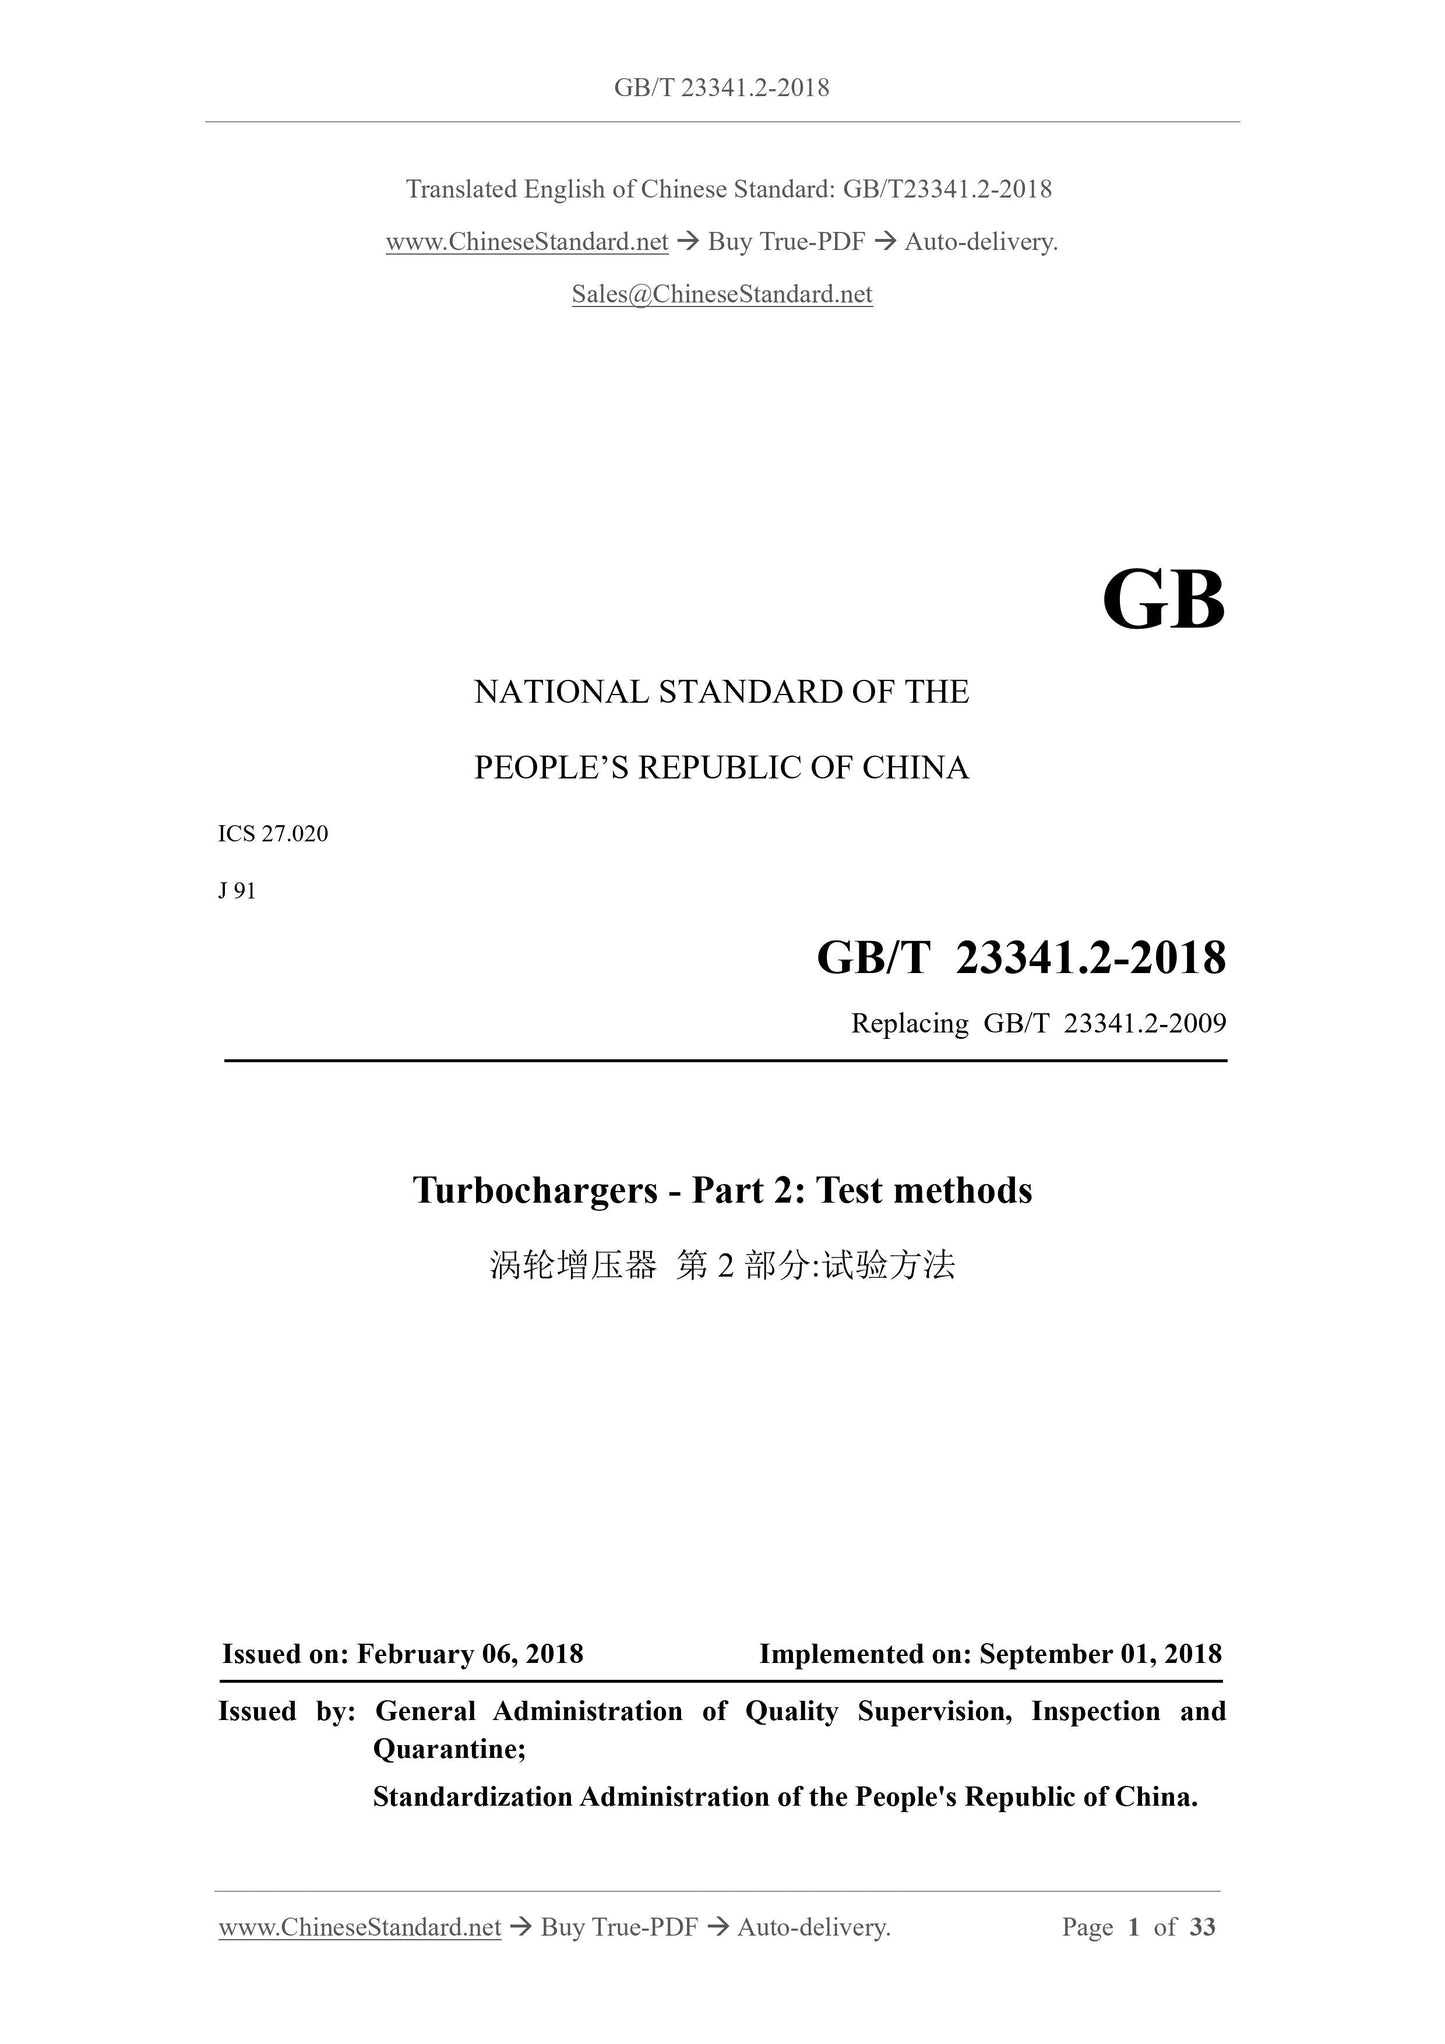 GB/T 23341.2-2018 Page 1